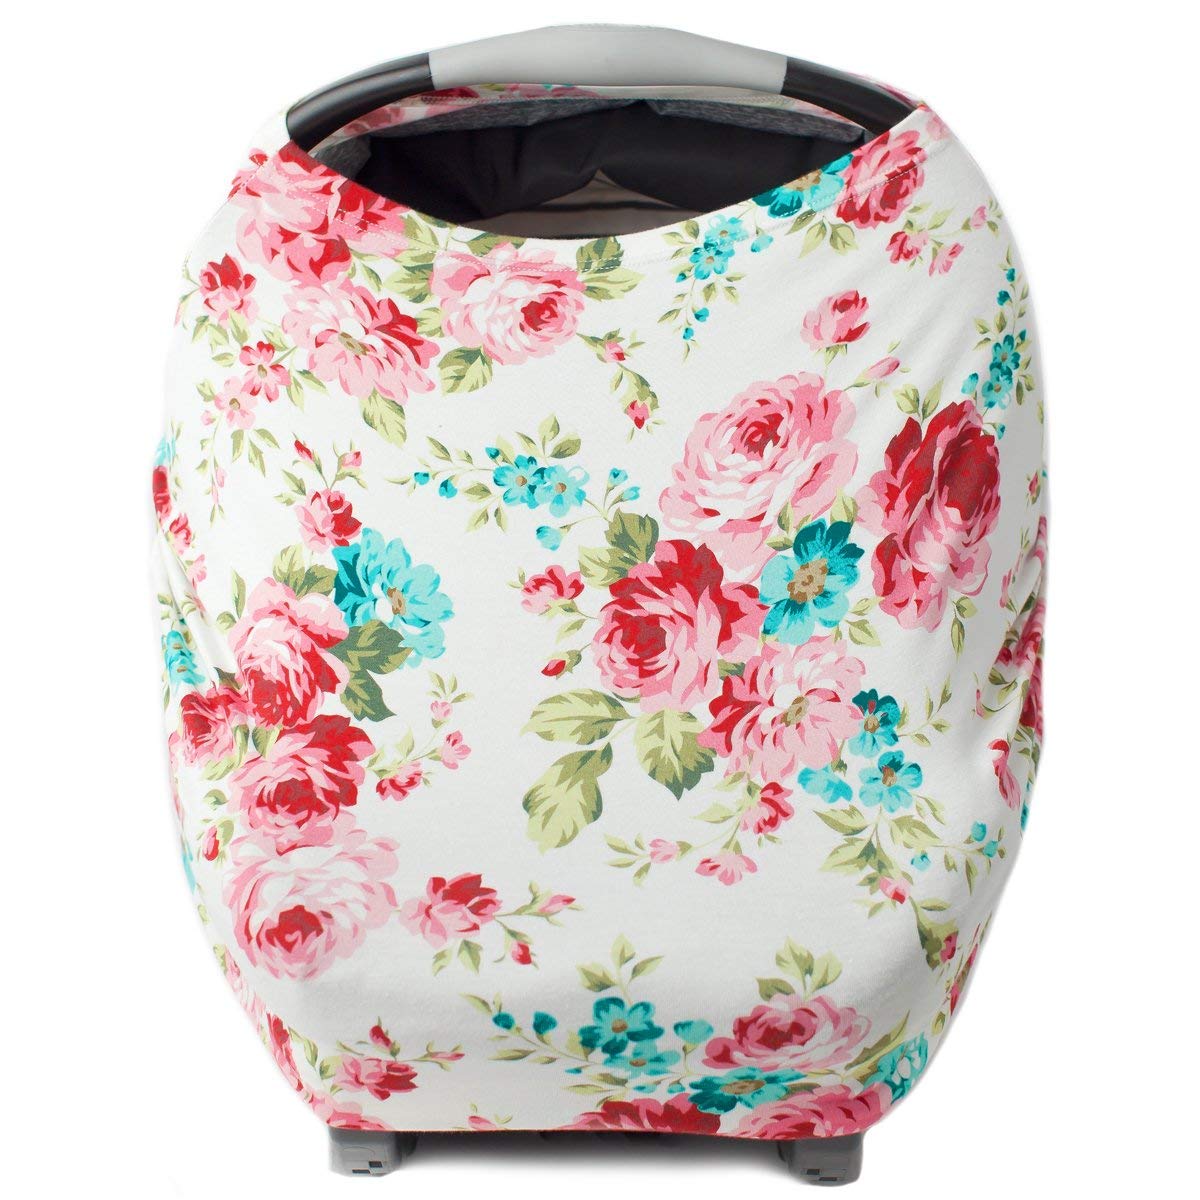 Book Cover Kids N’ Such Baby Car Seat Cover Car Seat Canopy & Nursing Cover, White Floral